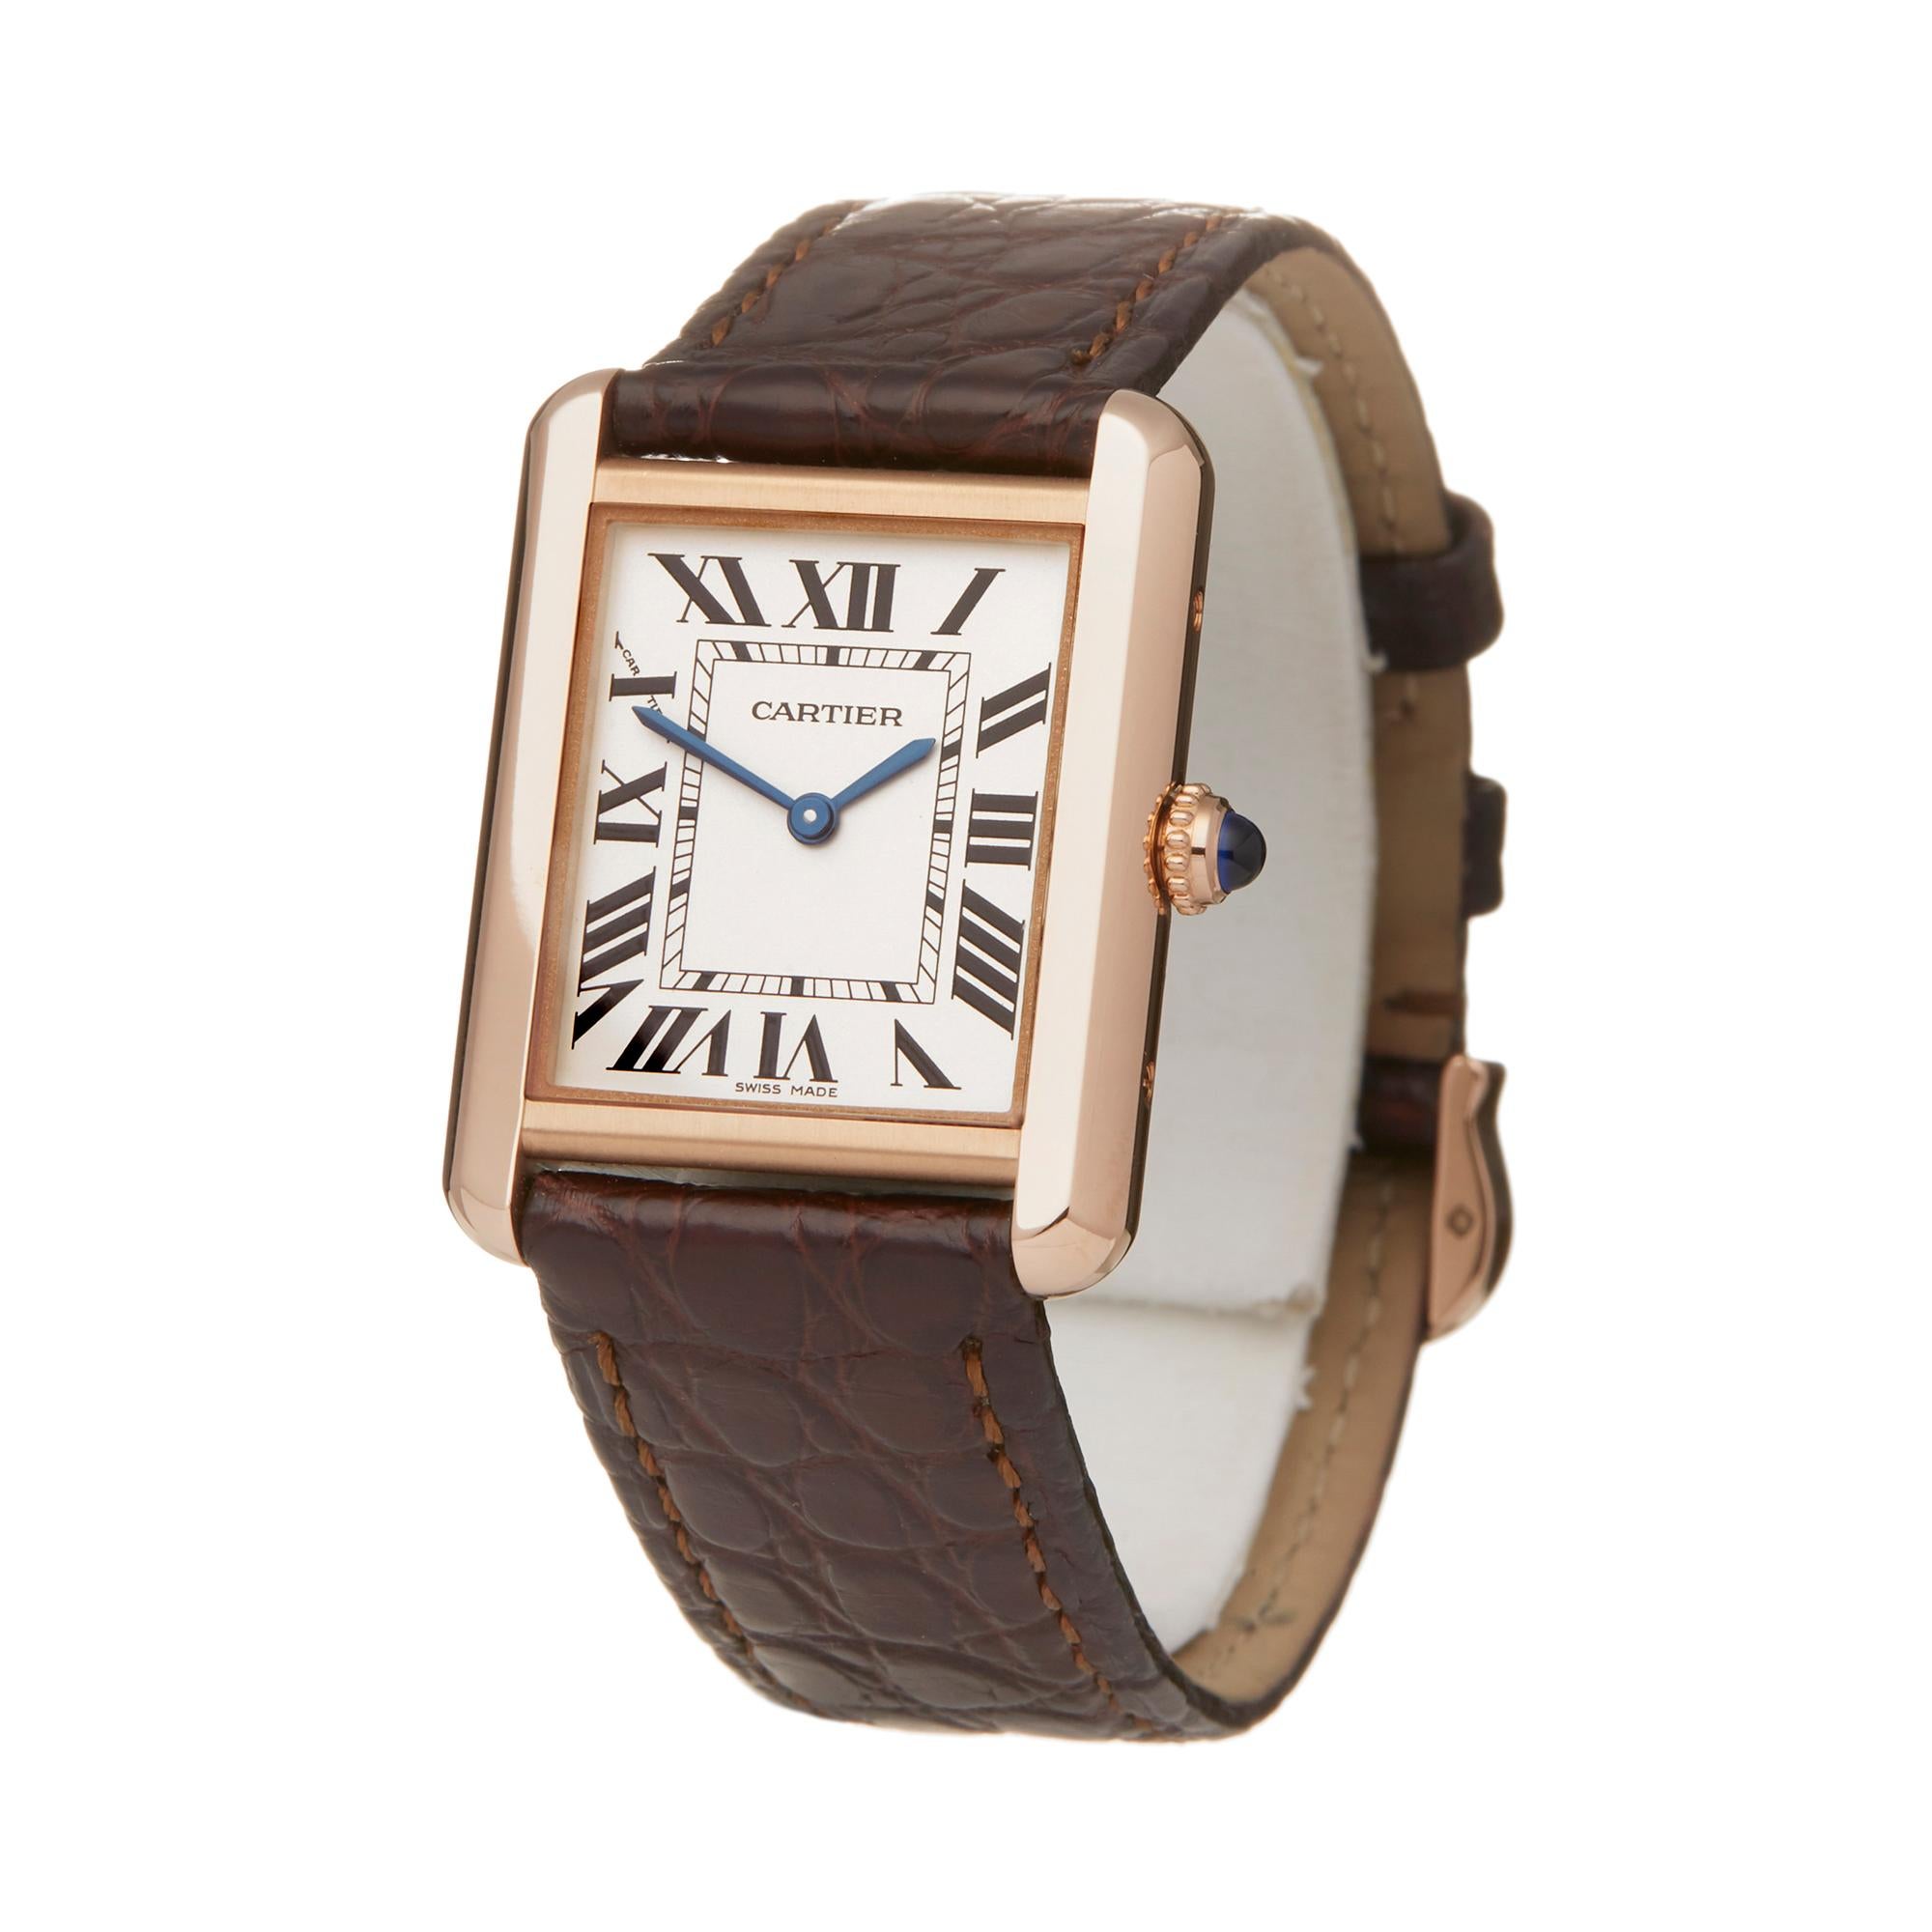 Reference: W6006
Manufacturer: Cartier
Model: : Tank Solo
Model Number: W5200024 or 3168
Age: Circa 2010's
Gender: Women's
Box and Papers: Box Only
Dial: Silver Roman
Glass: Sapphire Crystal
Movement: Quartz
Water Resistance: To Manufacturers